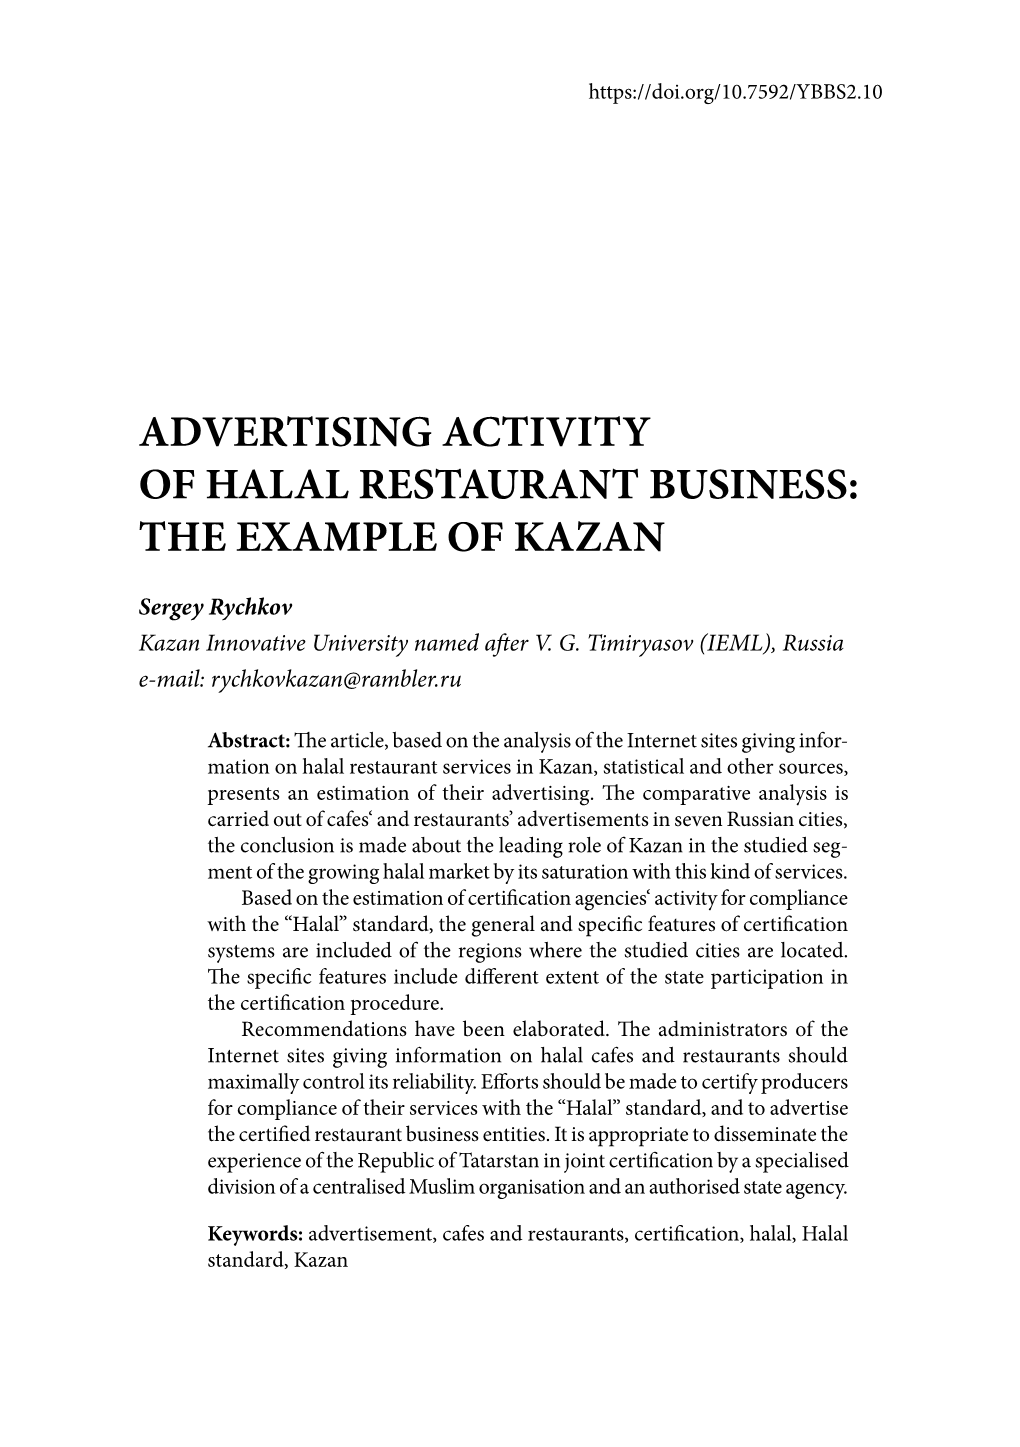 Advertising Activity of Halal Restaurant Business: the Example of Kazan